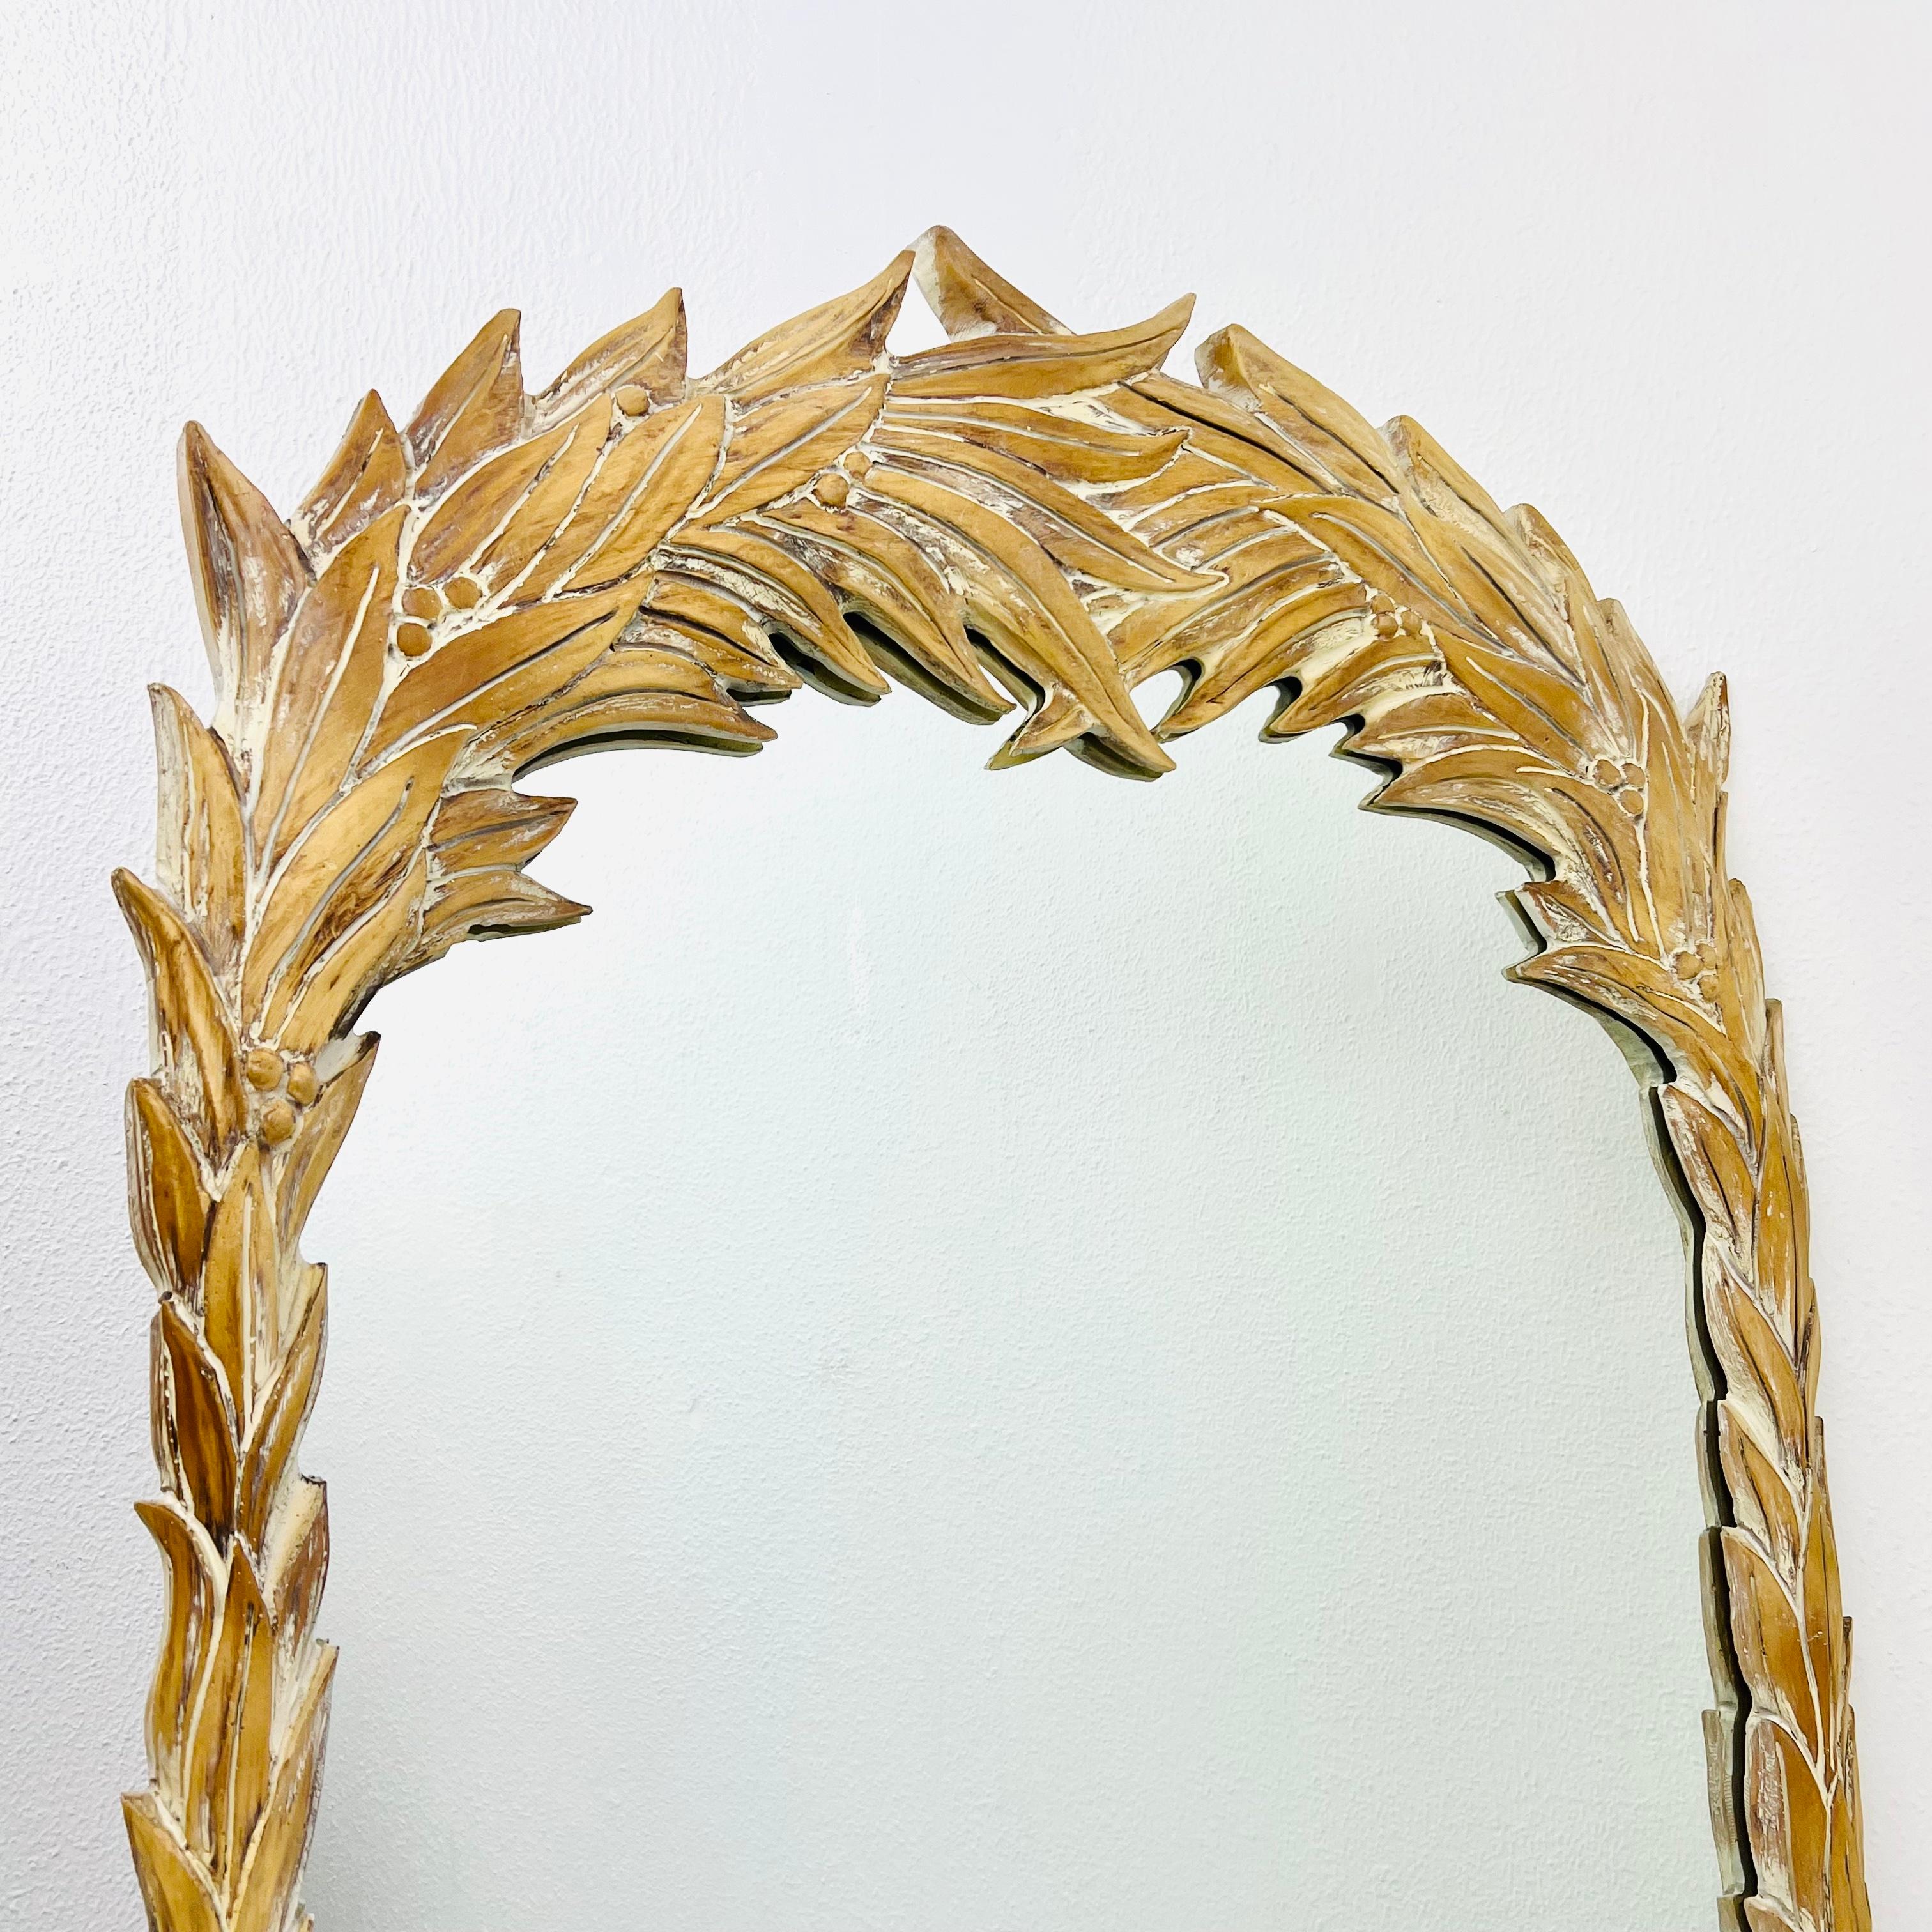 Carved Wood Palm Frond Mirror in the Style of Serge Roche For Sale 7